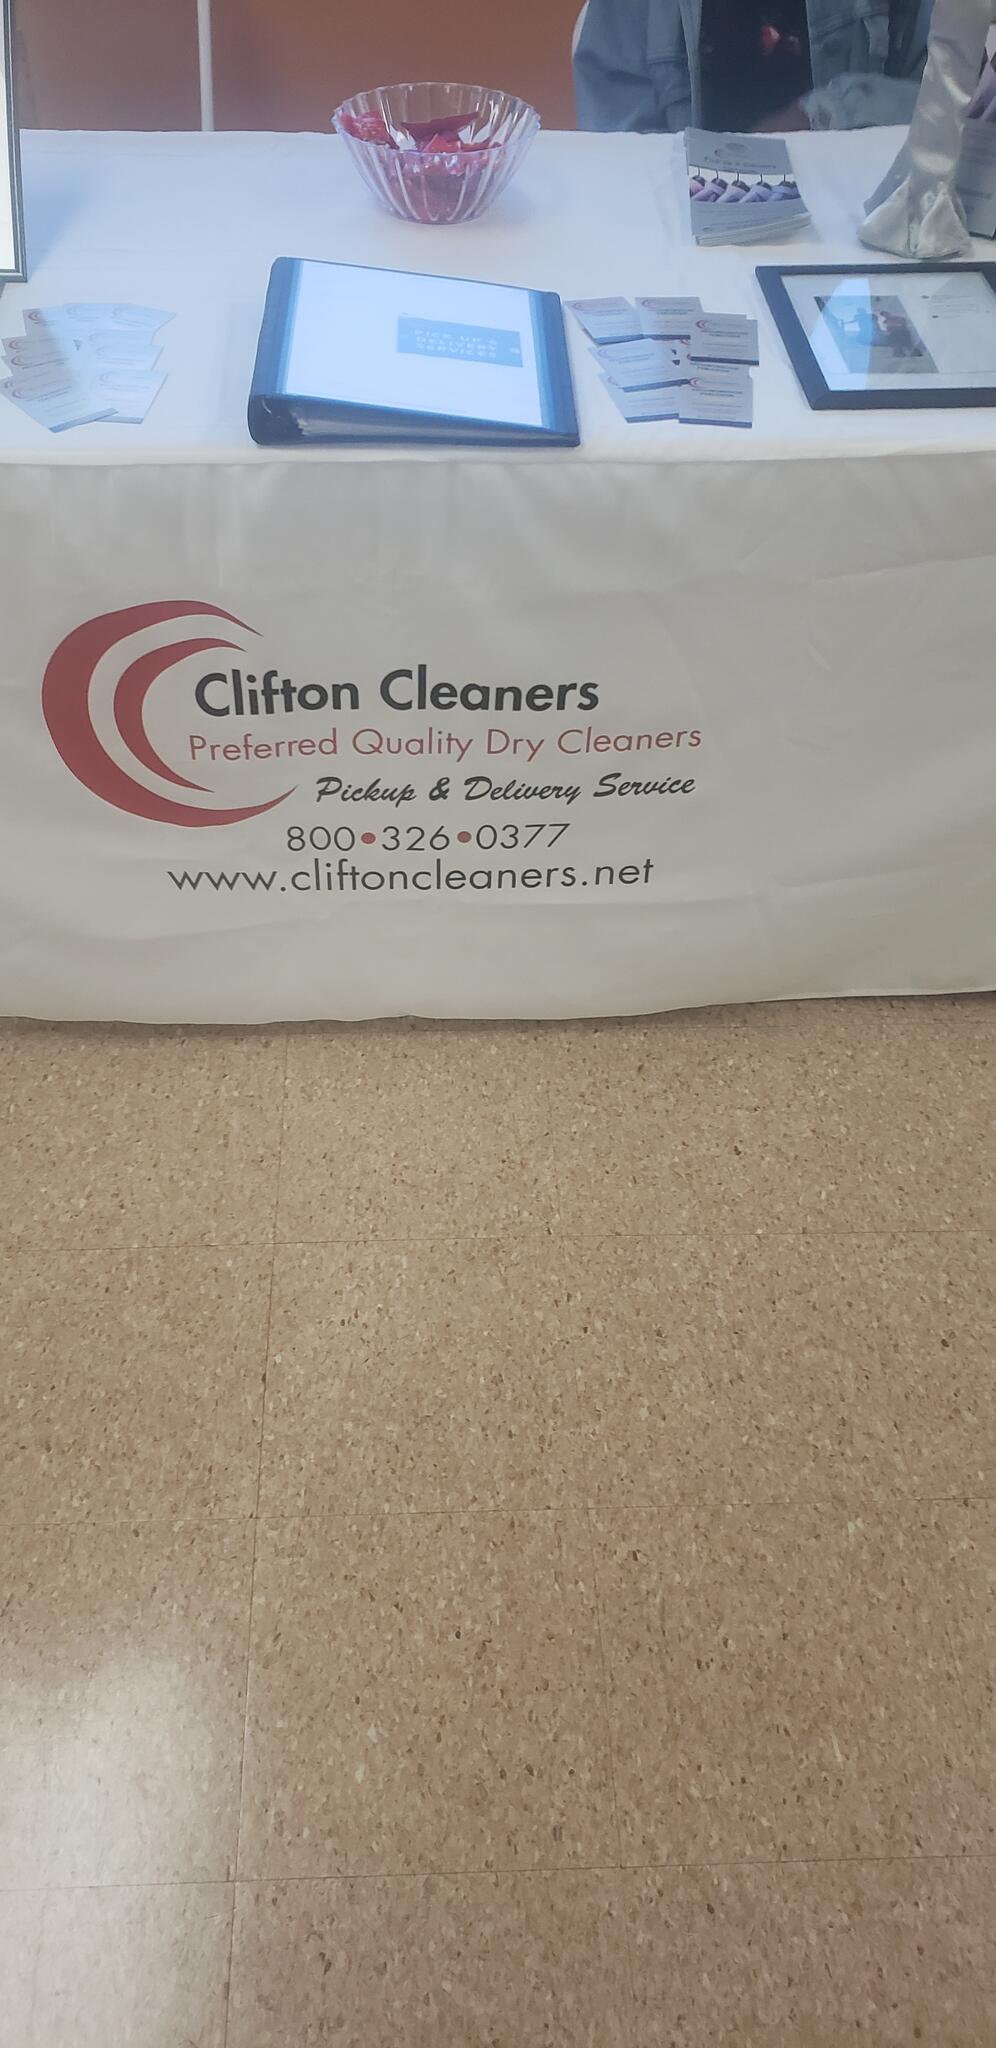 Clifton Cleaners